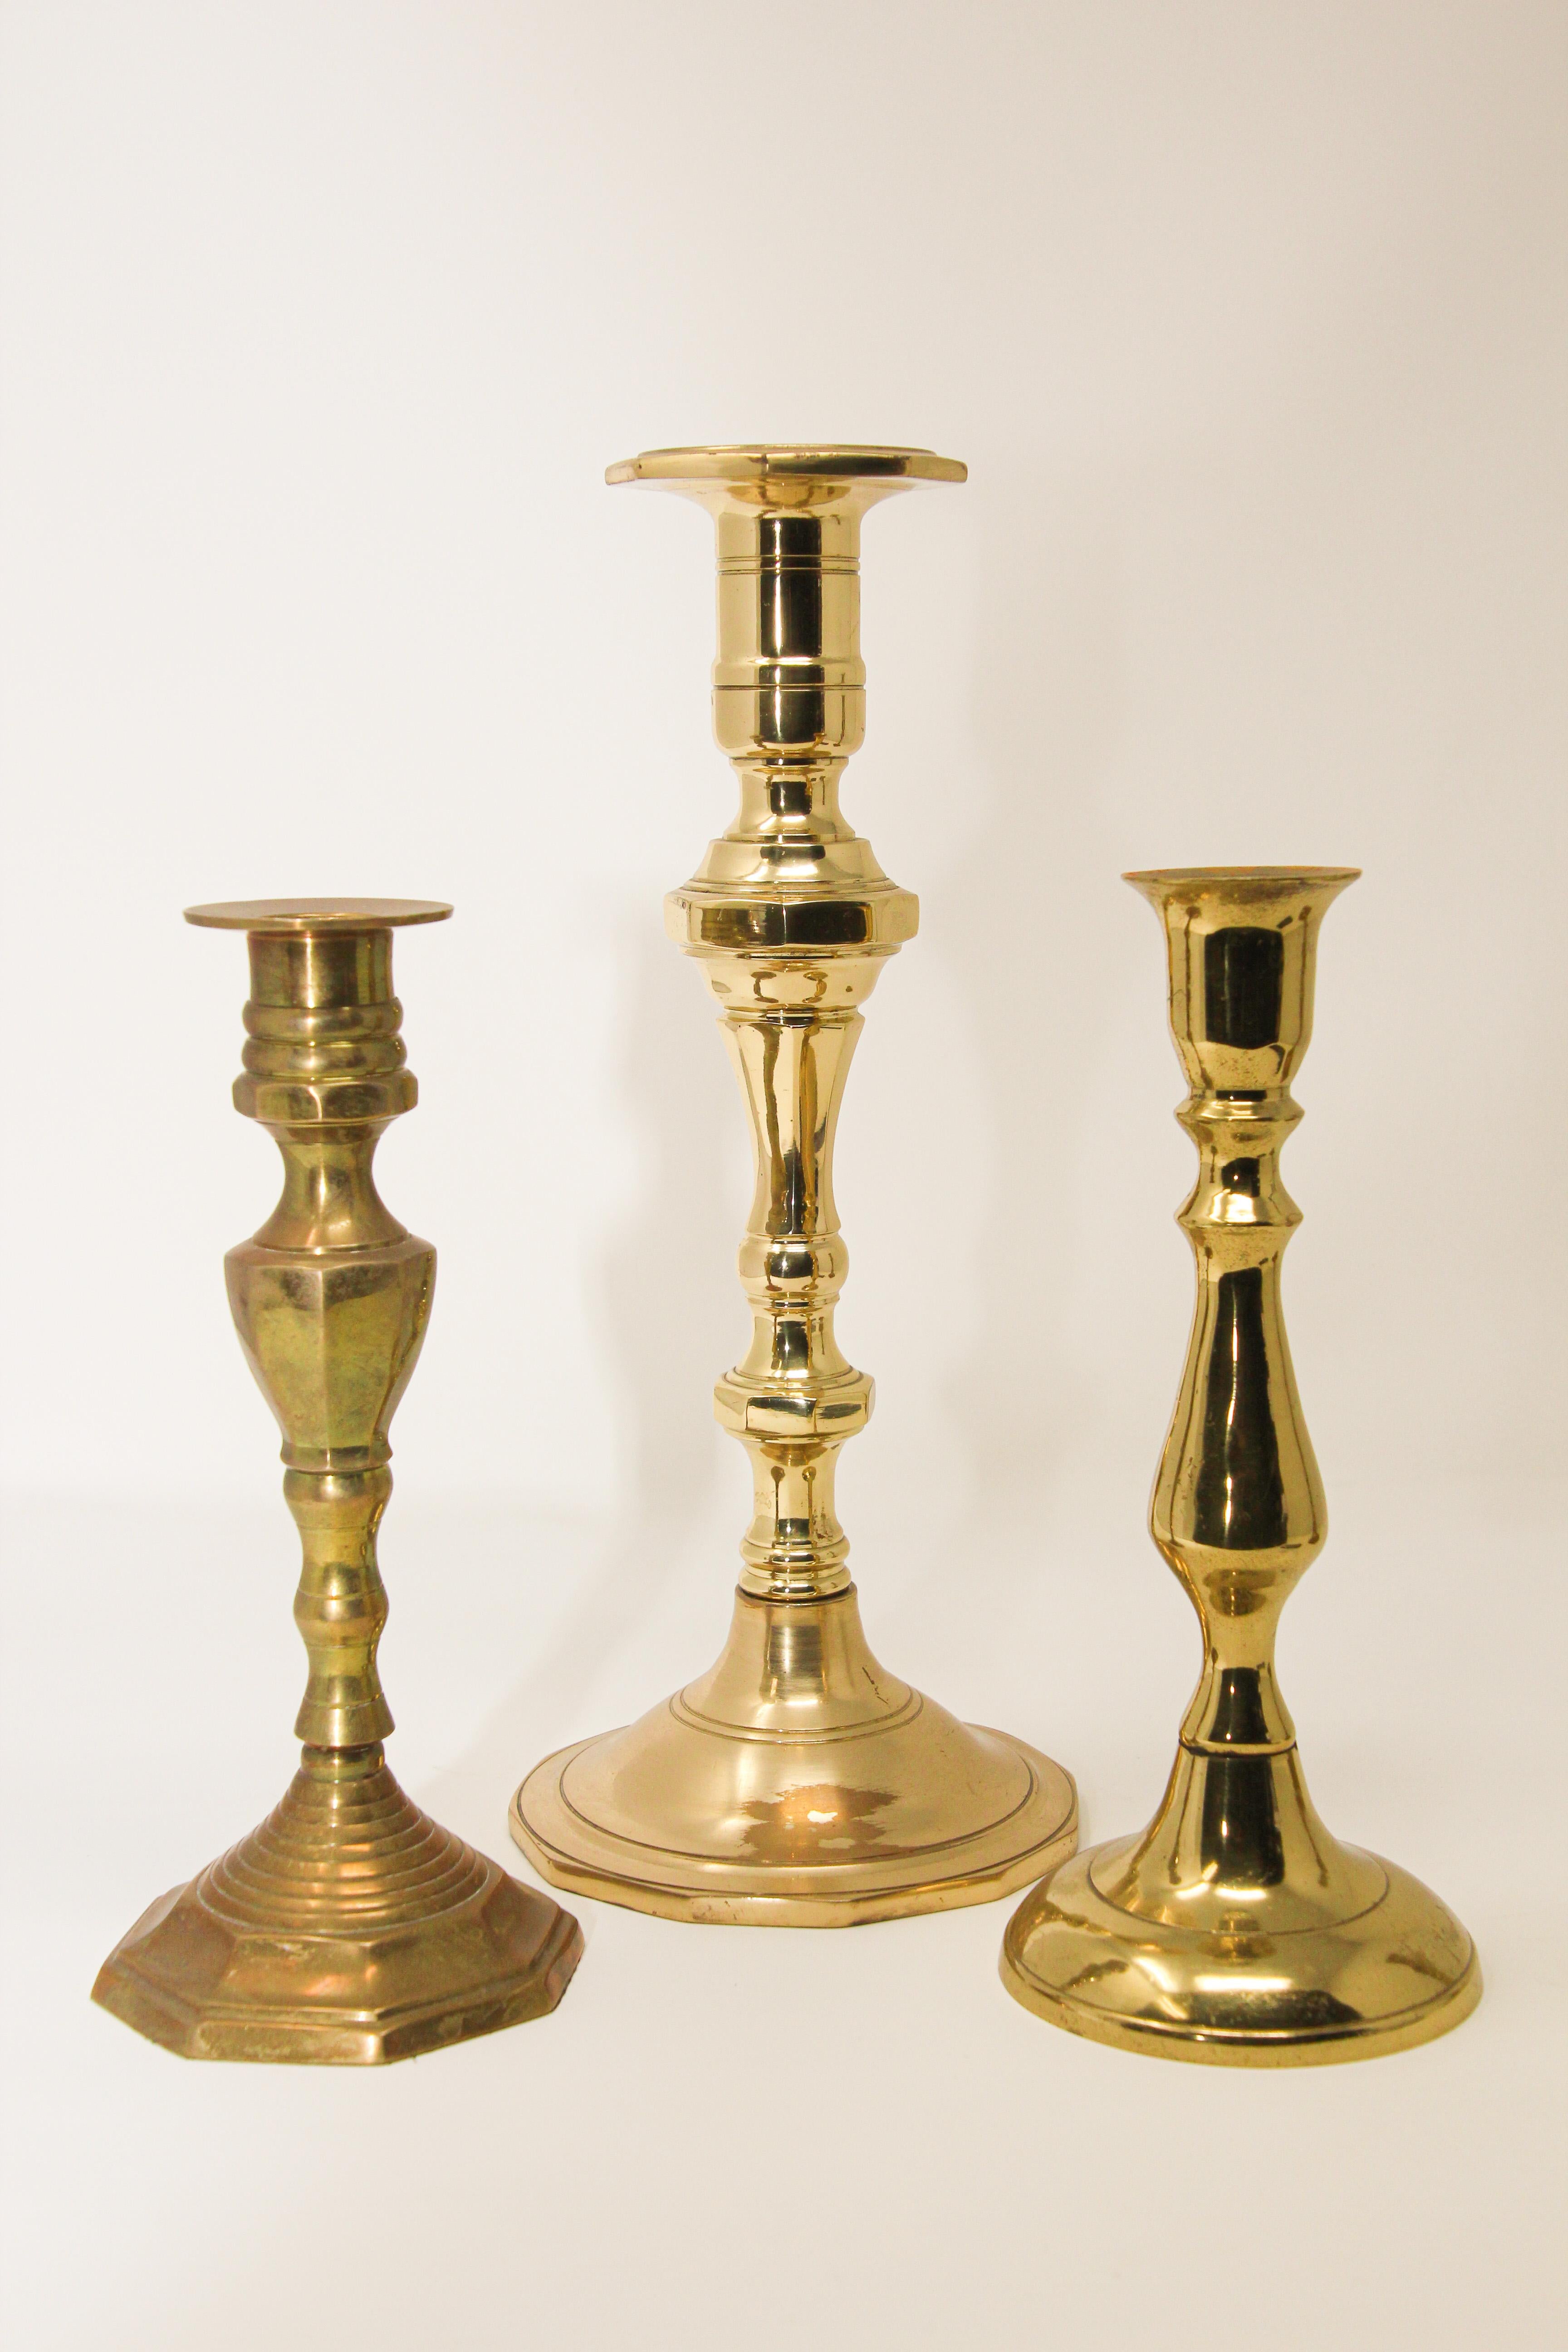 Set of three Victorian brass polished candlesticks.
19th century hand-tooled brass candlesticks.
Handcrafted Victorian brass candle sticks, candleholders, finely handcrafted.
Measures: 
Large: 11